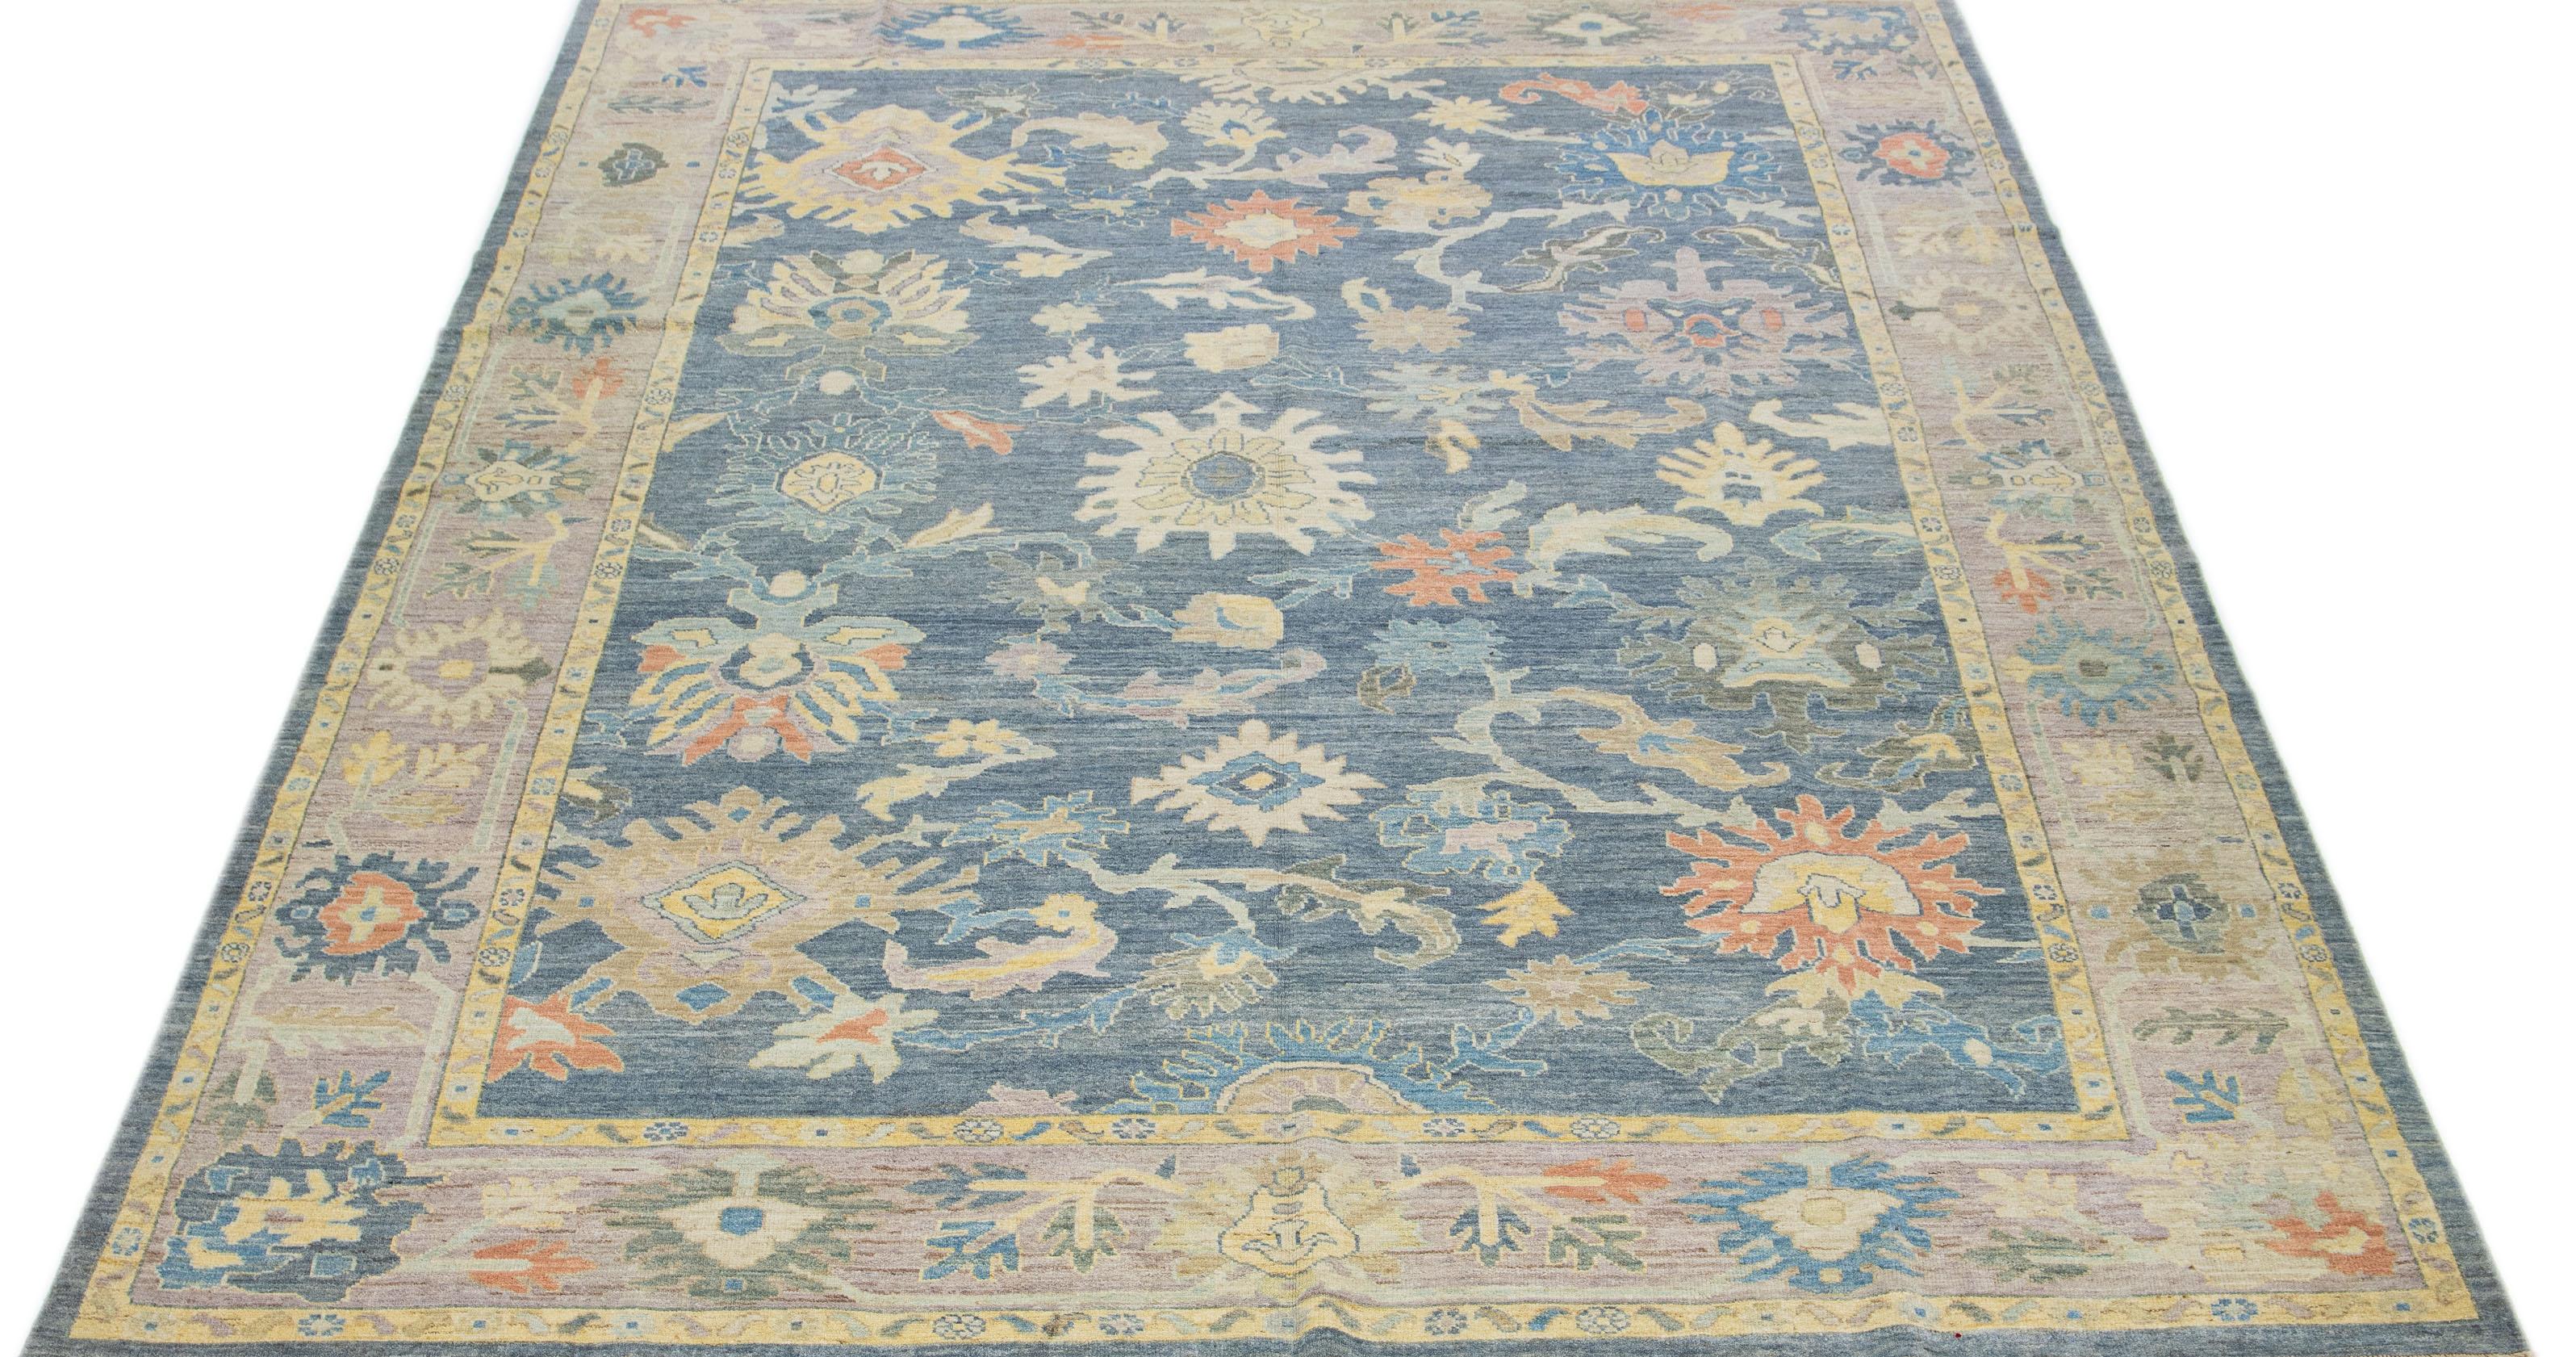 This contemporary take on the traditional Sultanabad style is showcased in an exquisite hand-knotted wool rug with a striking navy blue color. An intricately designed frame accentuates its all-over floral motif, adorned with multicolored accents